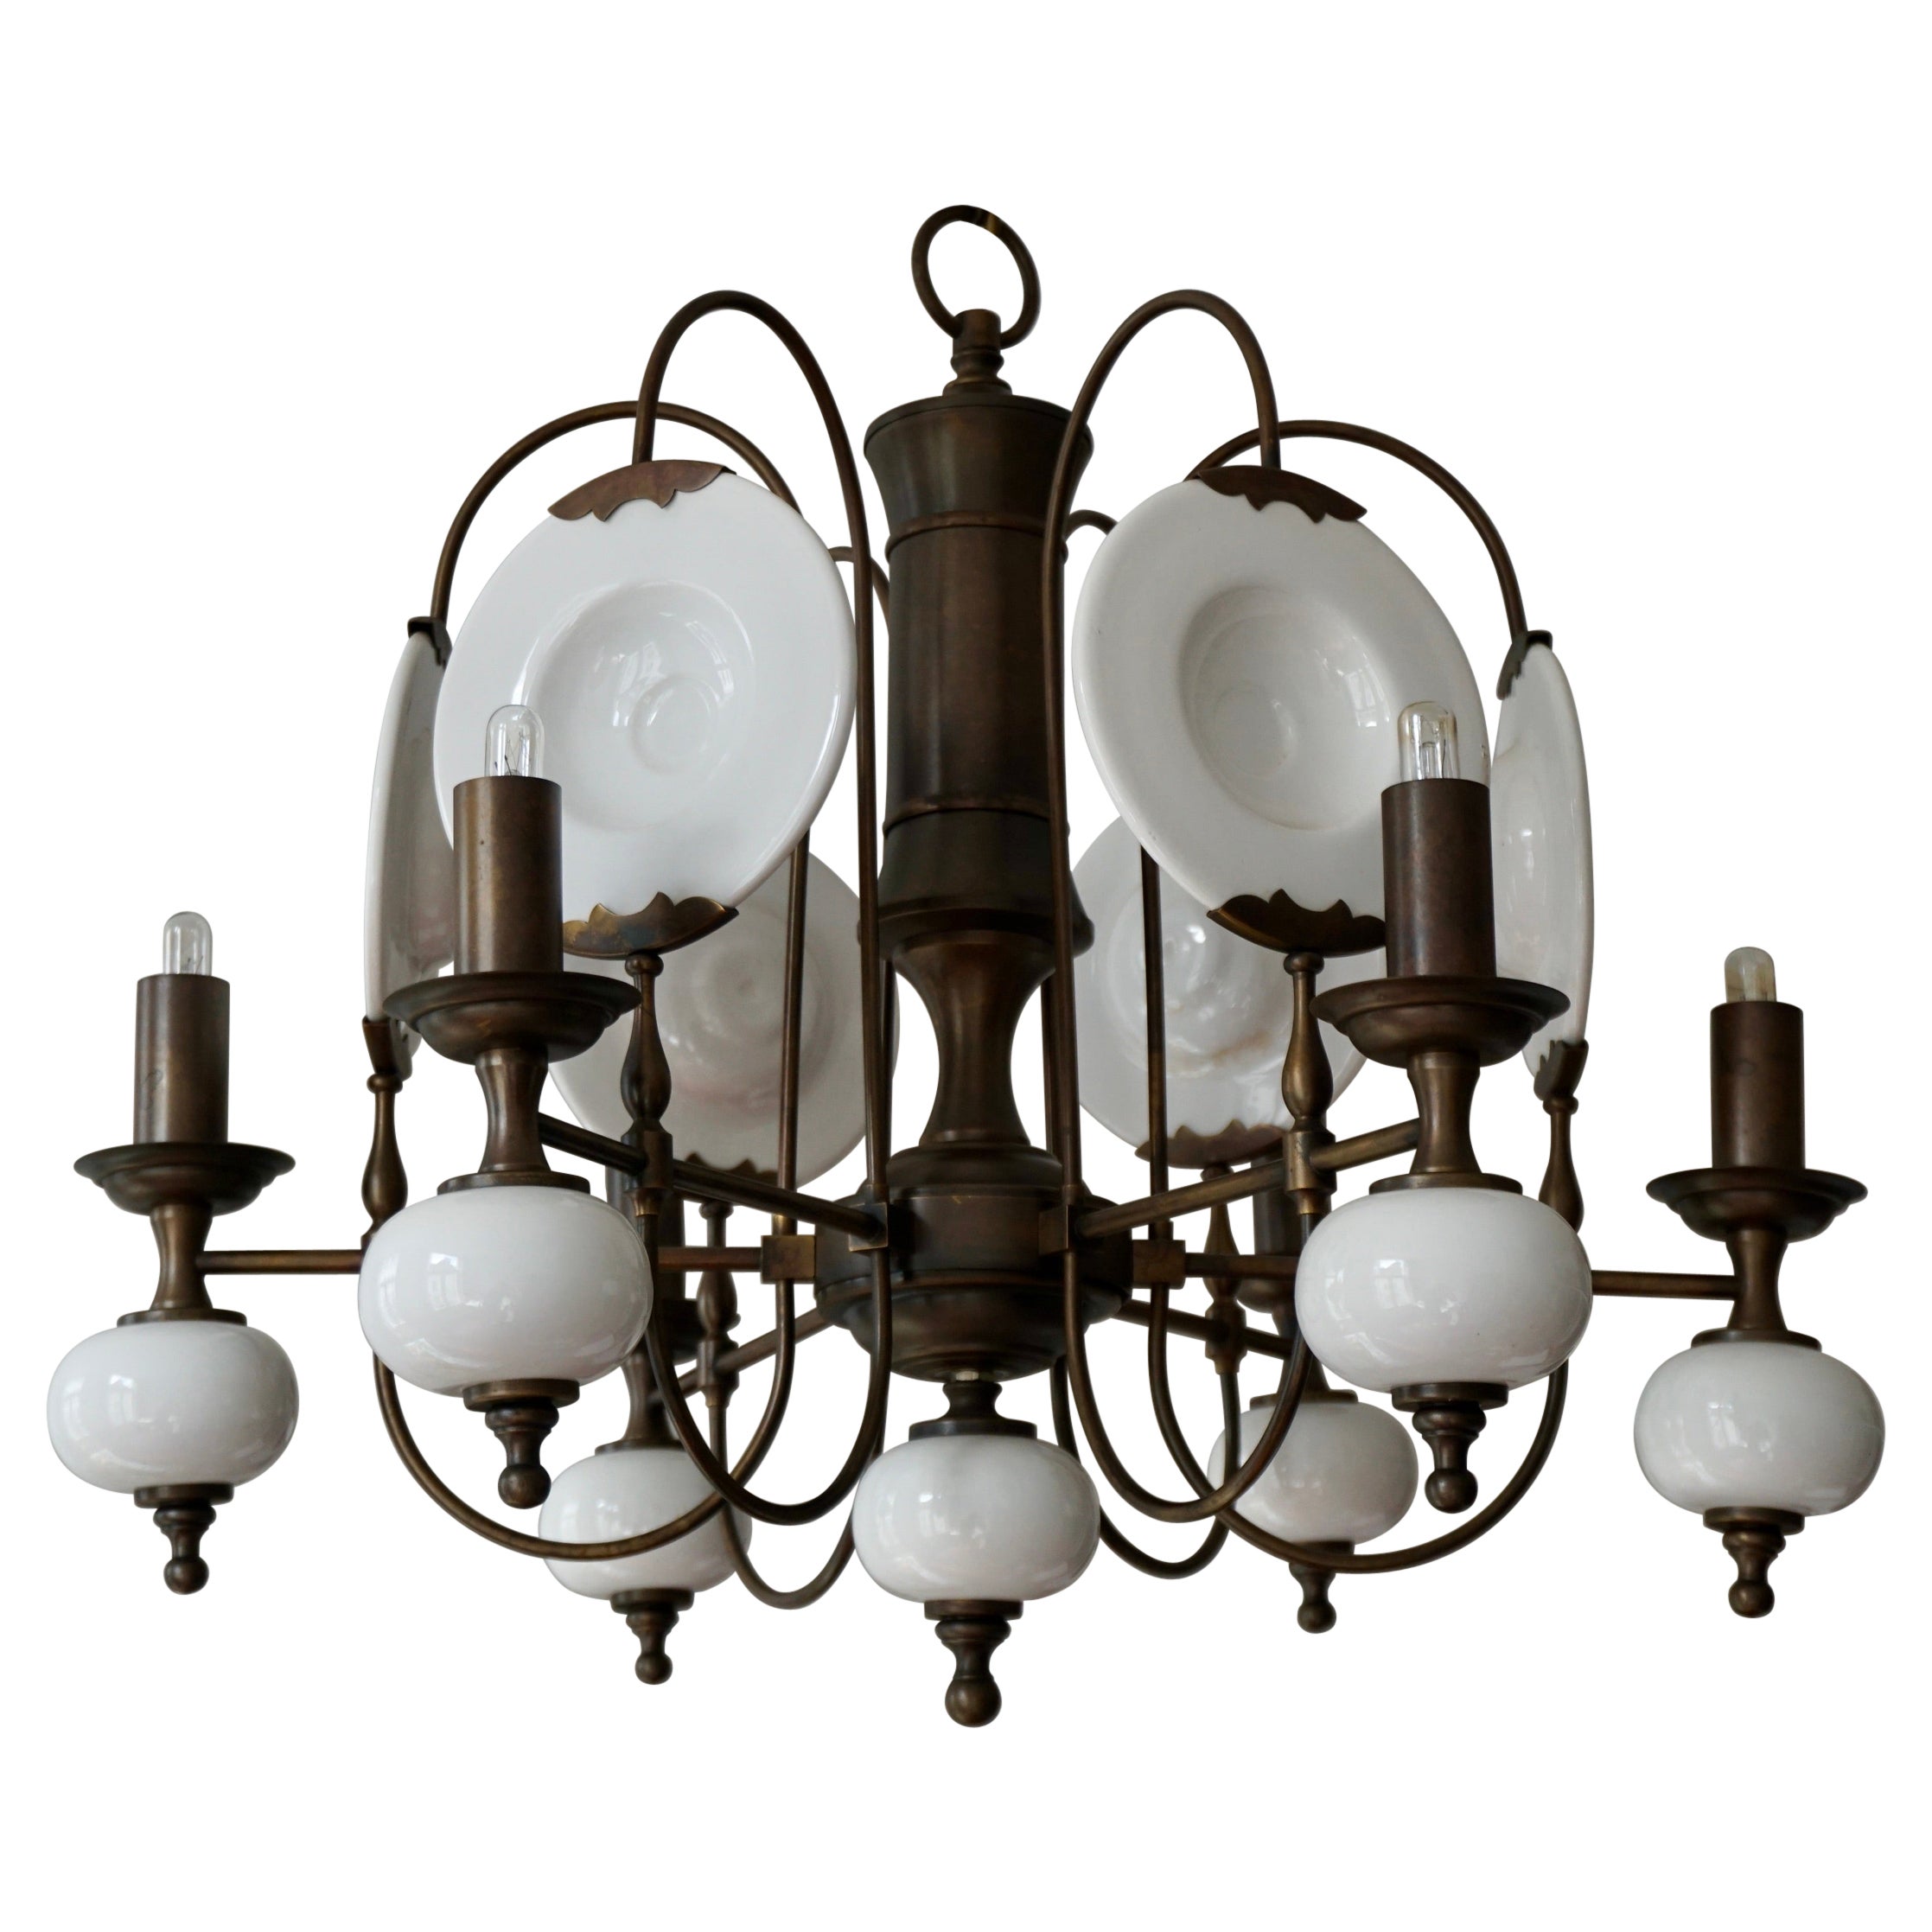 Chandelier in Brass and White Porcelain